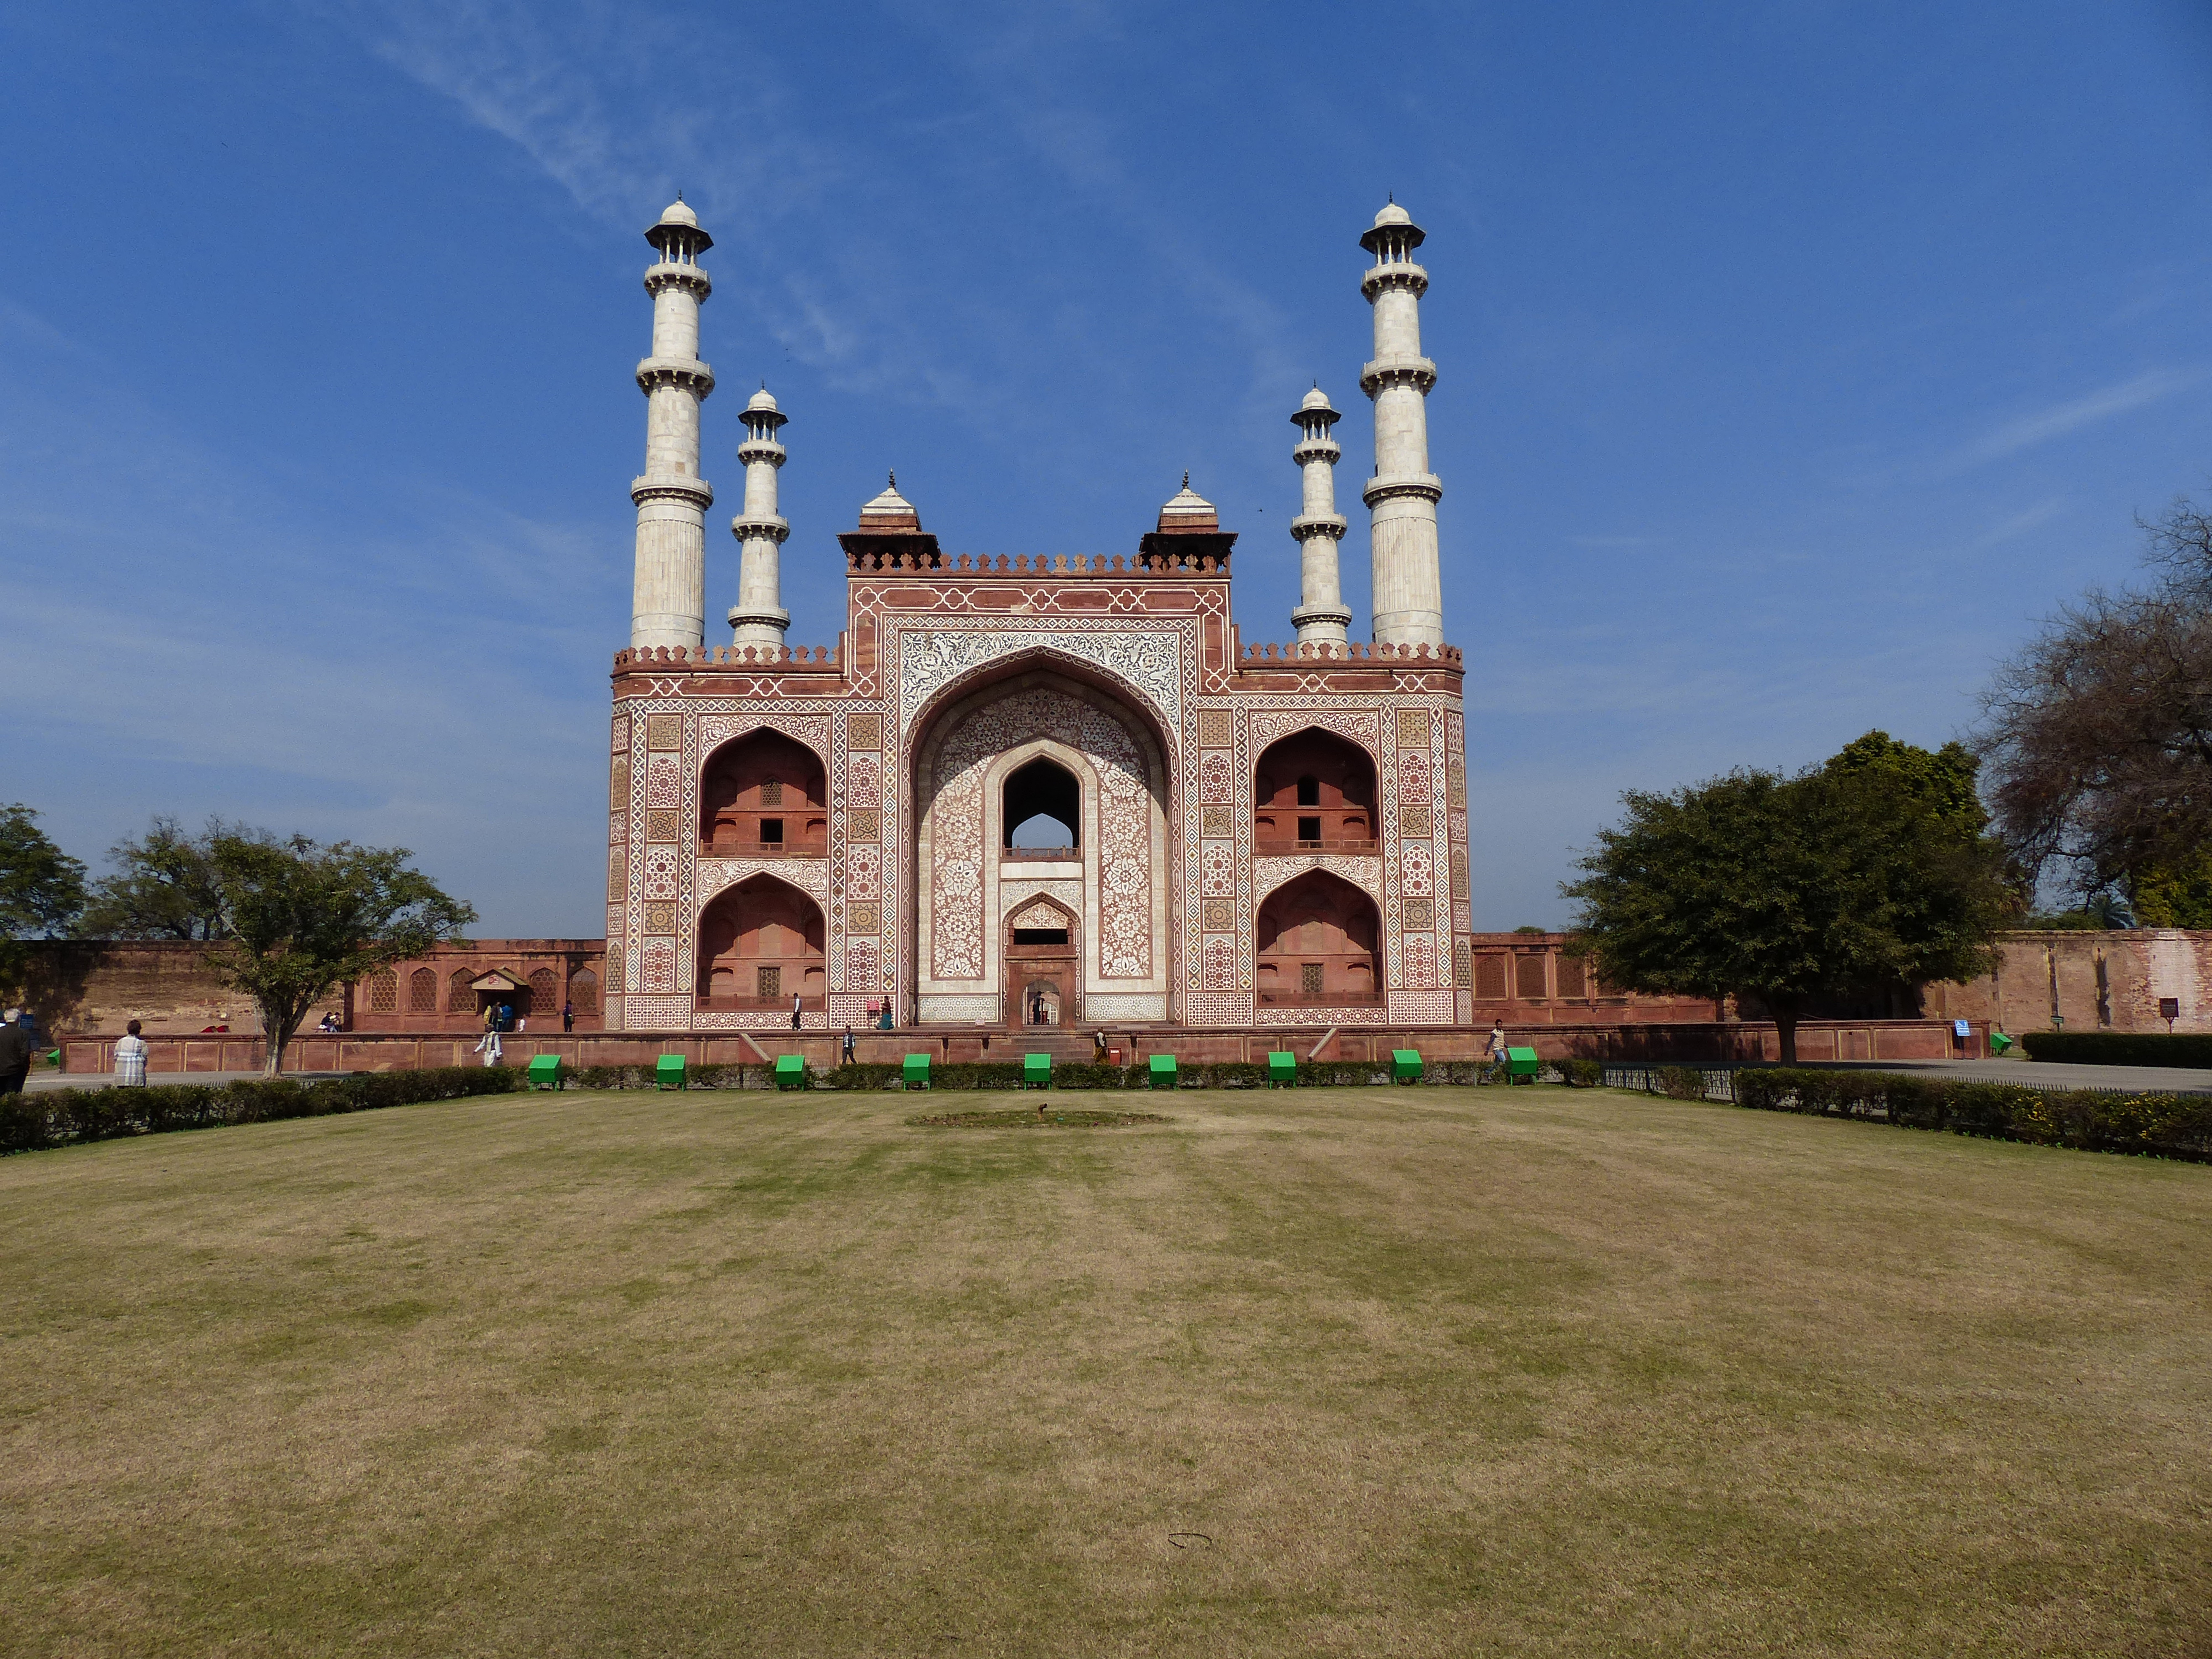 Akbar’s Mausoleum | Agra, India Attractions - Lonely Planet